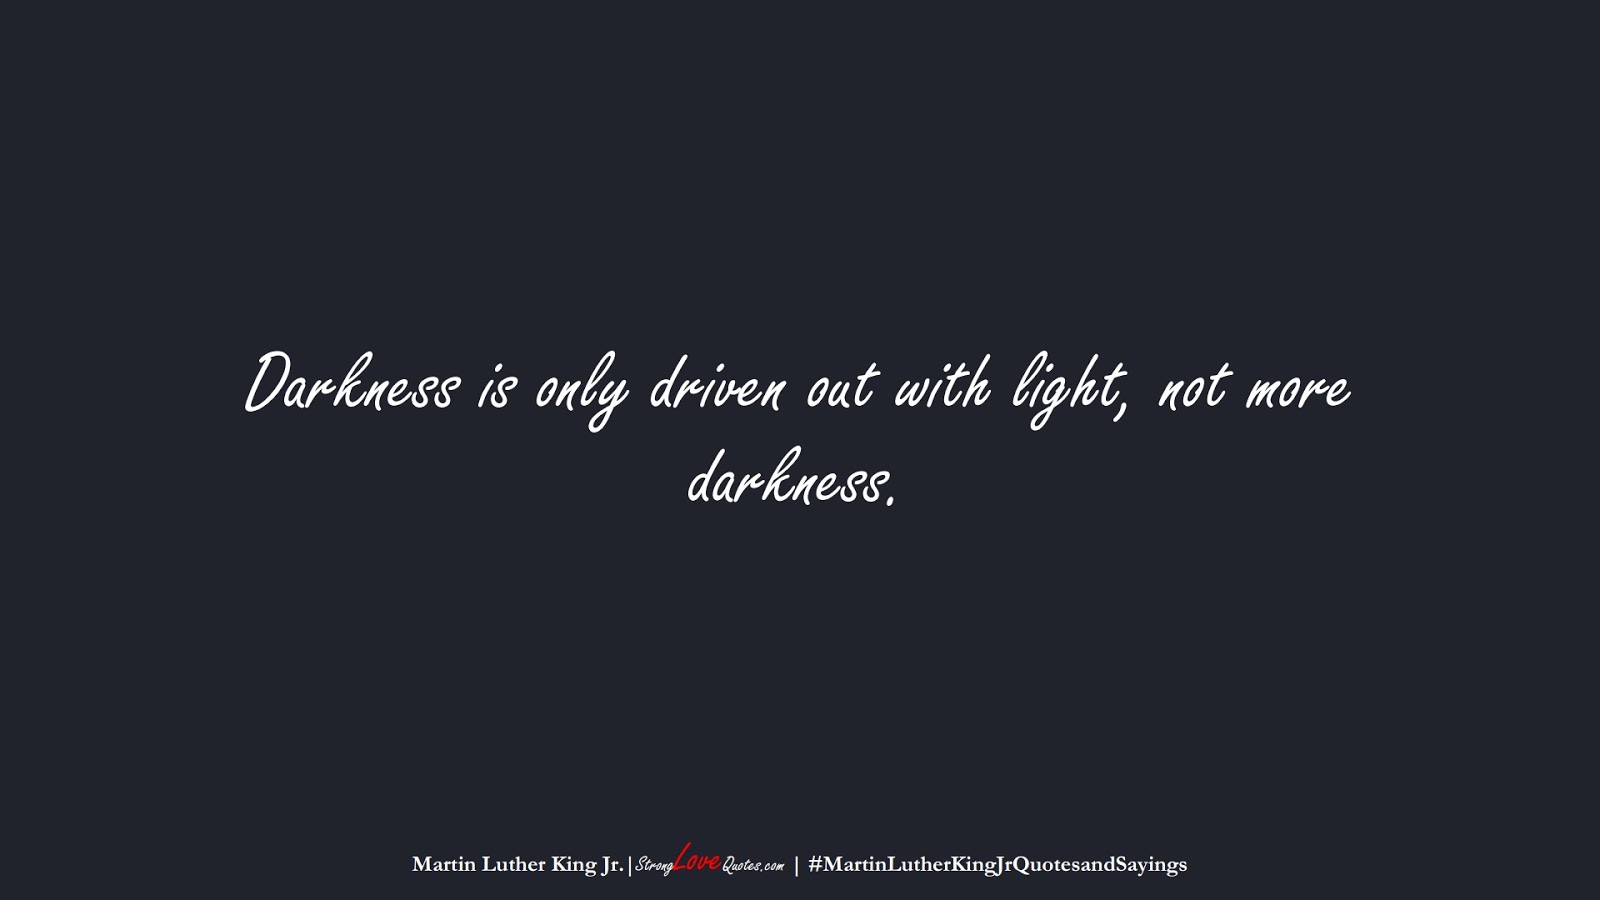 Darkness is only driven out with light, not more darkness. (Martin Luther King Jr.);  #MartinLutherKingJrQuotesandSayings